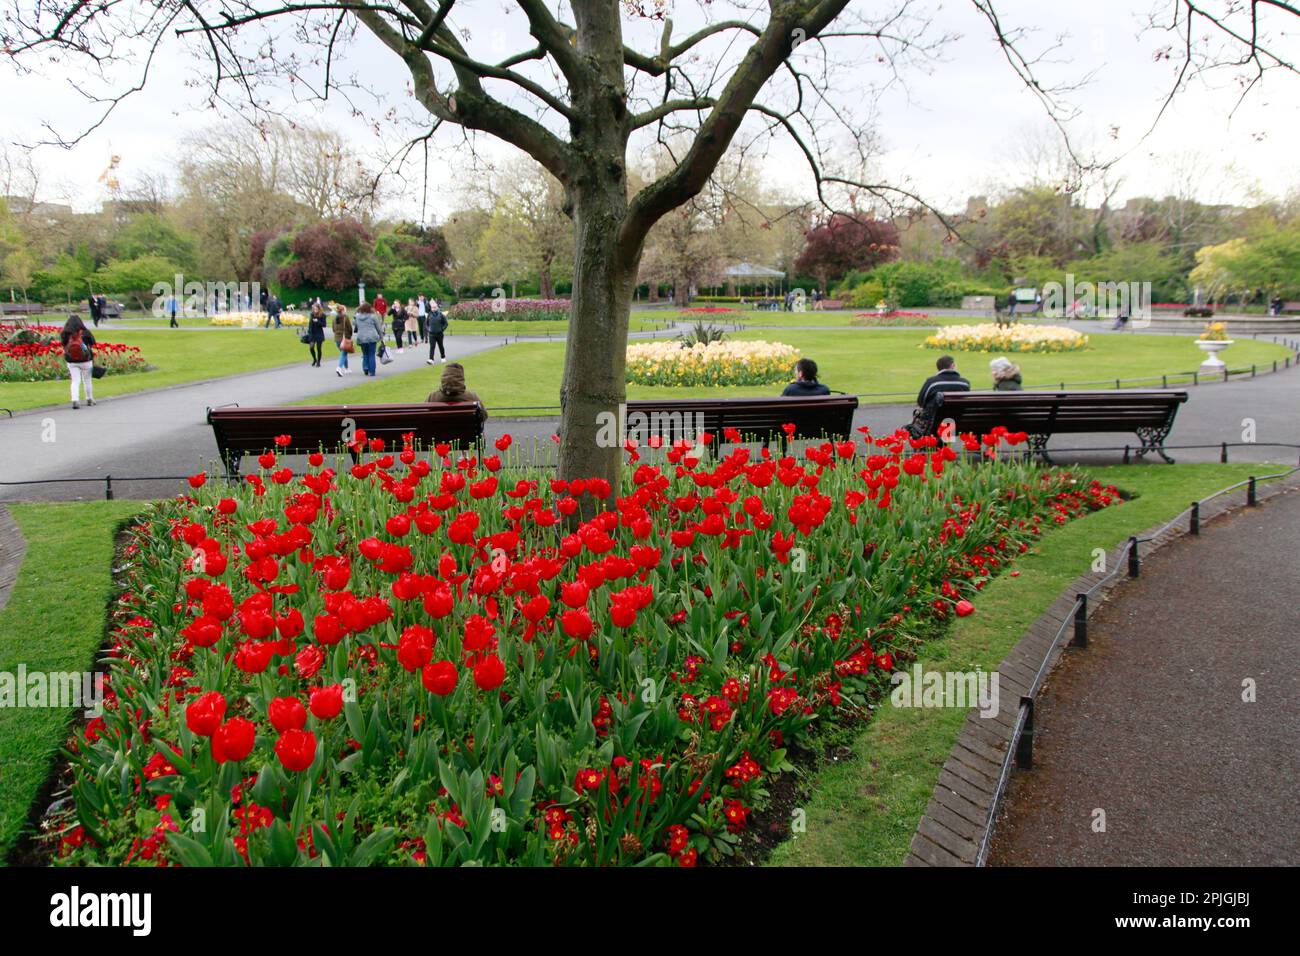 Merrion Square Park, Dublin, is a relaxing 18th century park in near Trinity College Dublin graces its beautiful landscaping and colorful tulips. Stock Photo